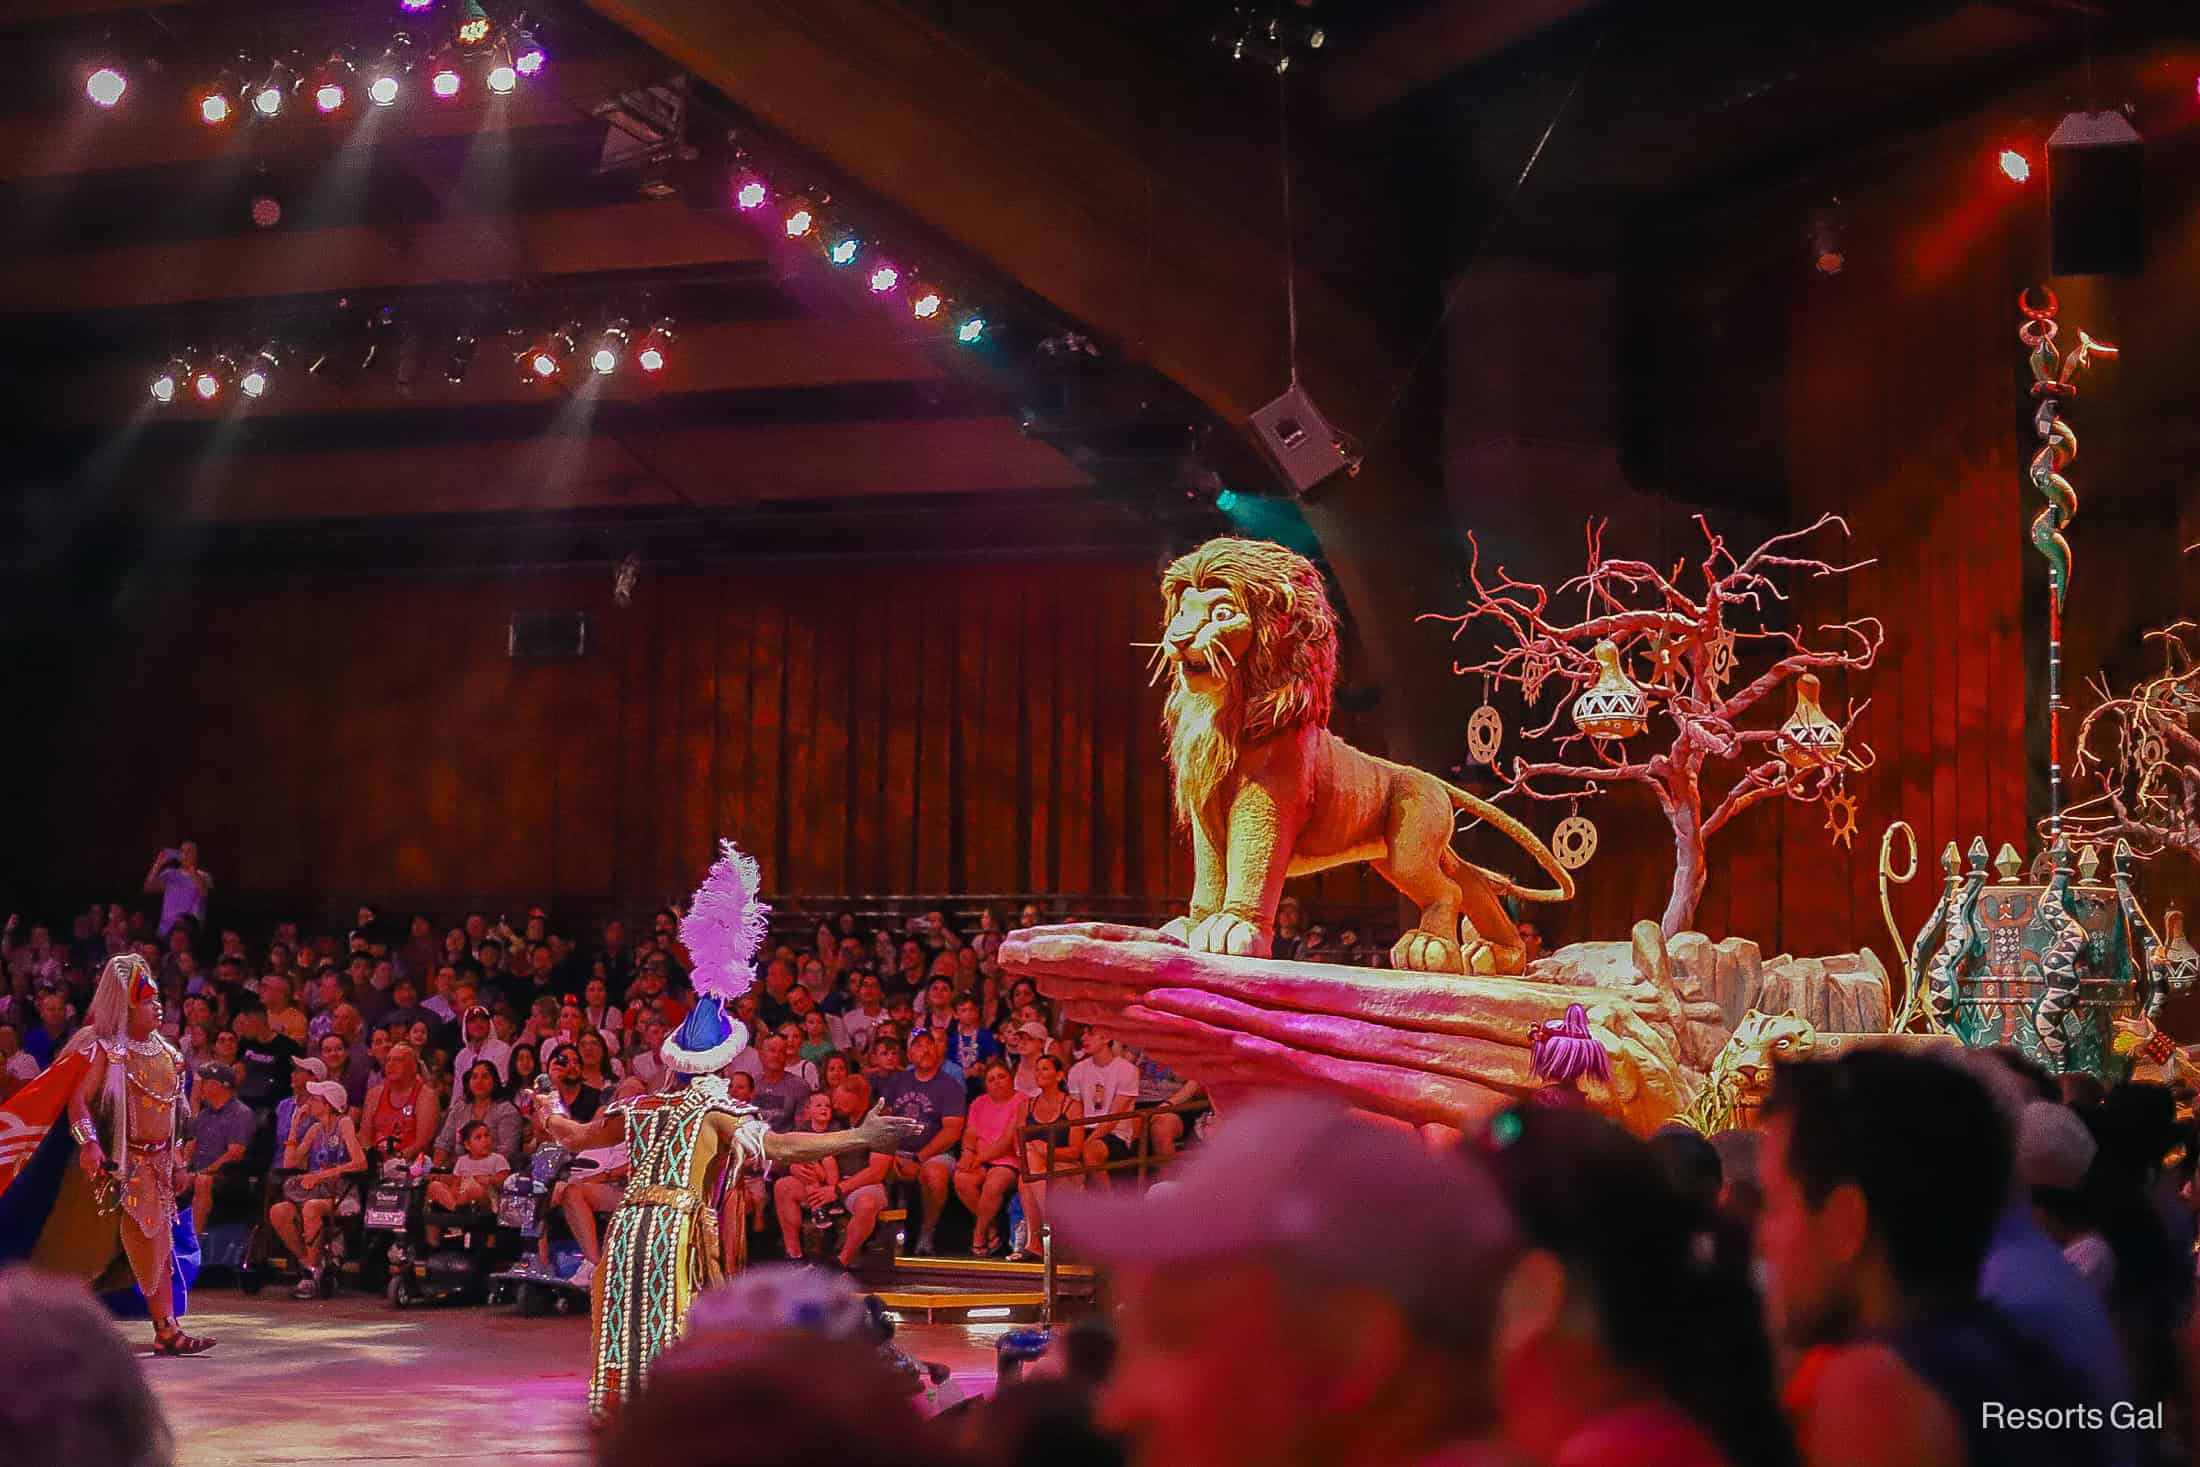 Simba represents the lion section of the audience during Festival of the Lion King 